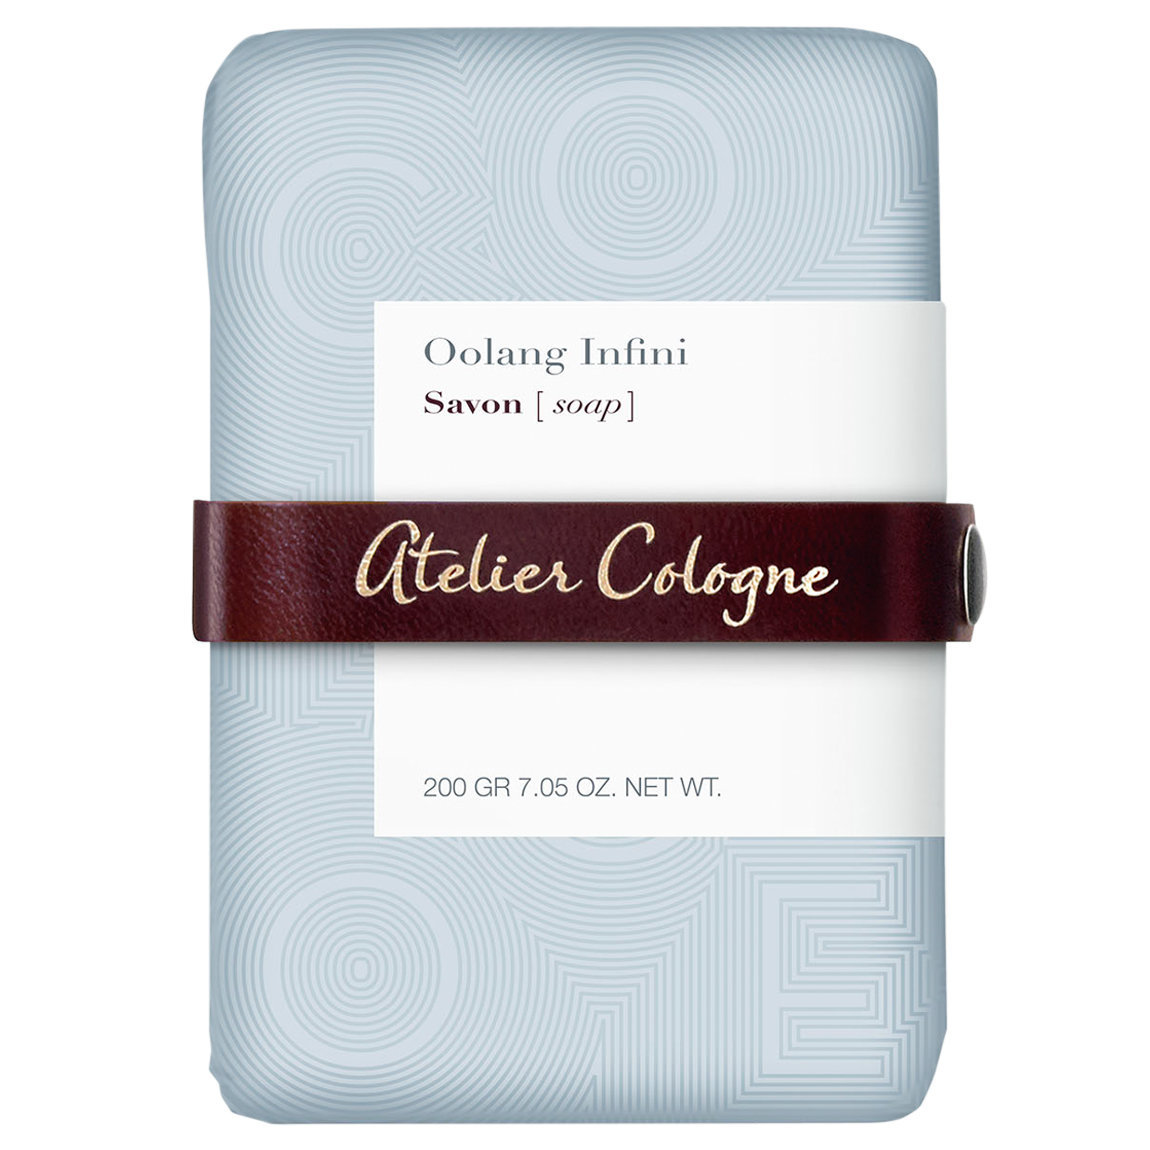 Atelier Cologne Oolang Infini Soap alternative view 1 - product swatch.